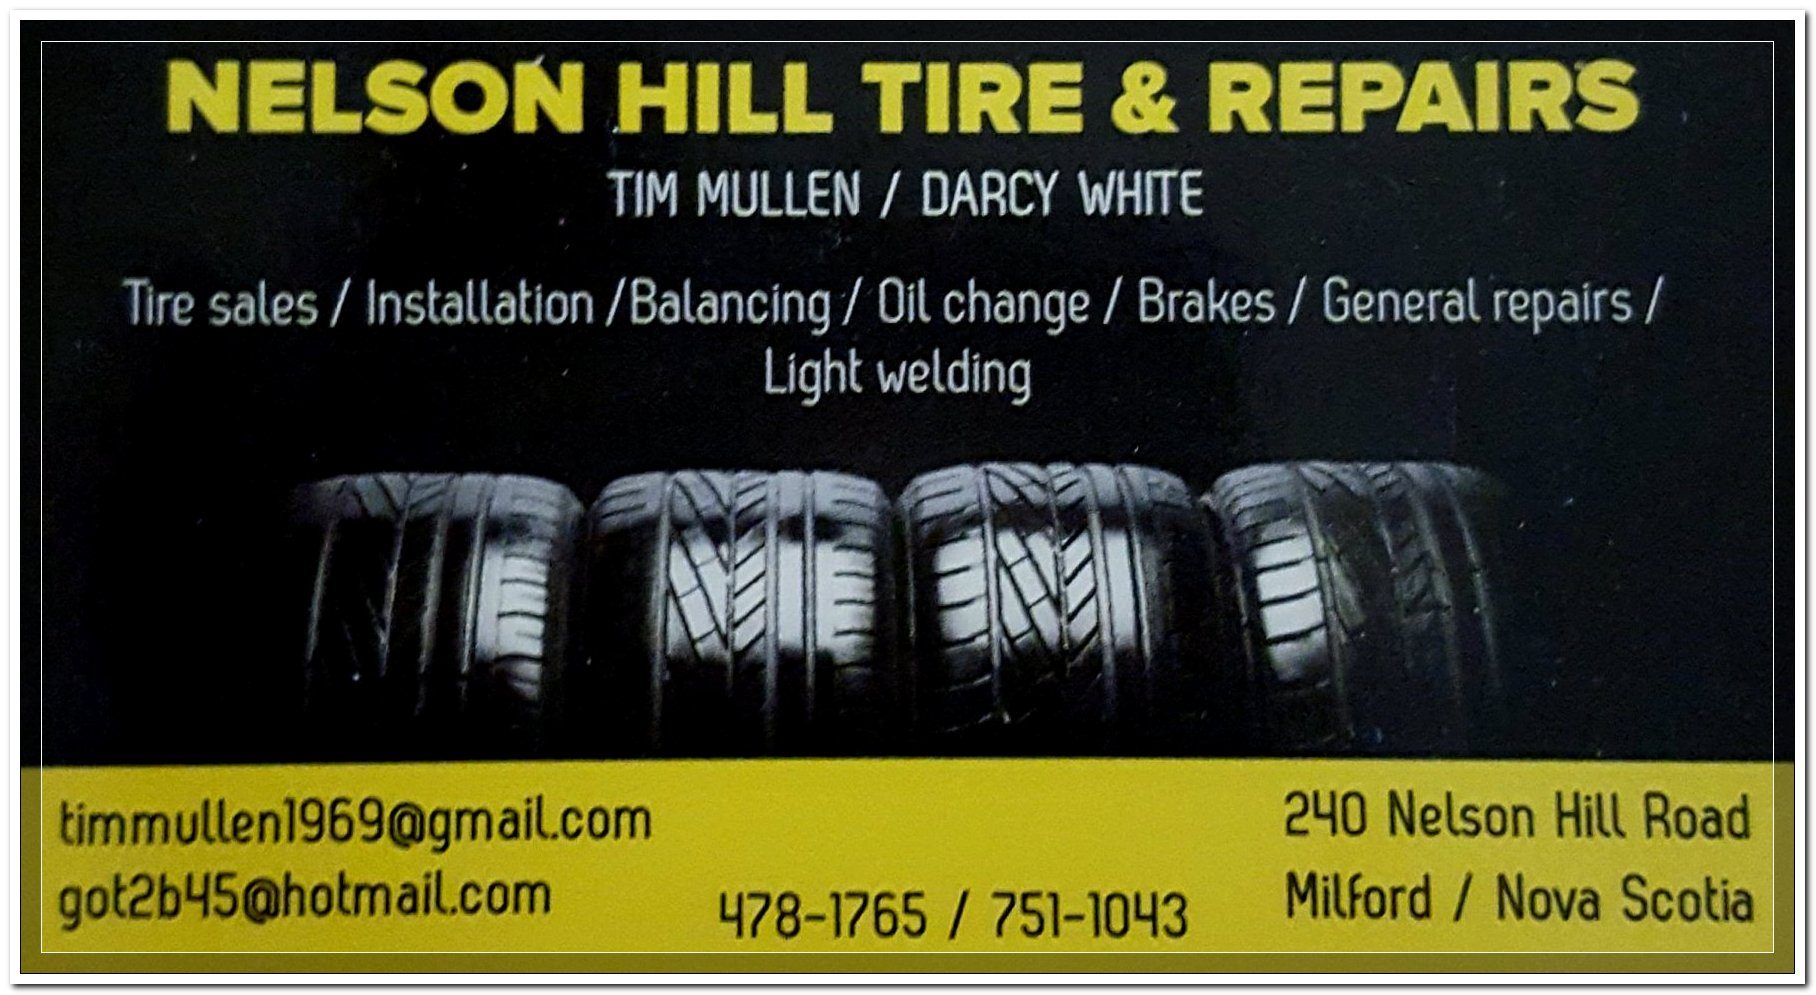 Nelson Hill Tire & Repairs